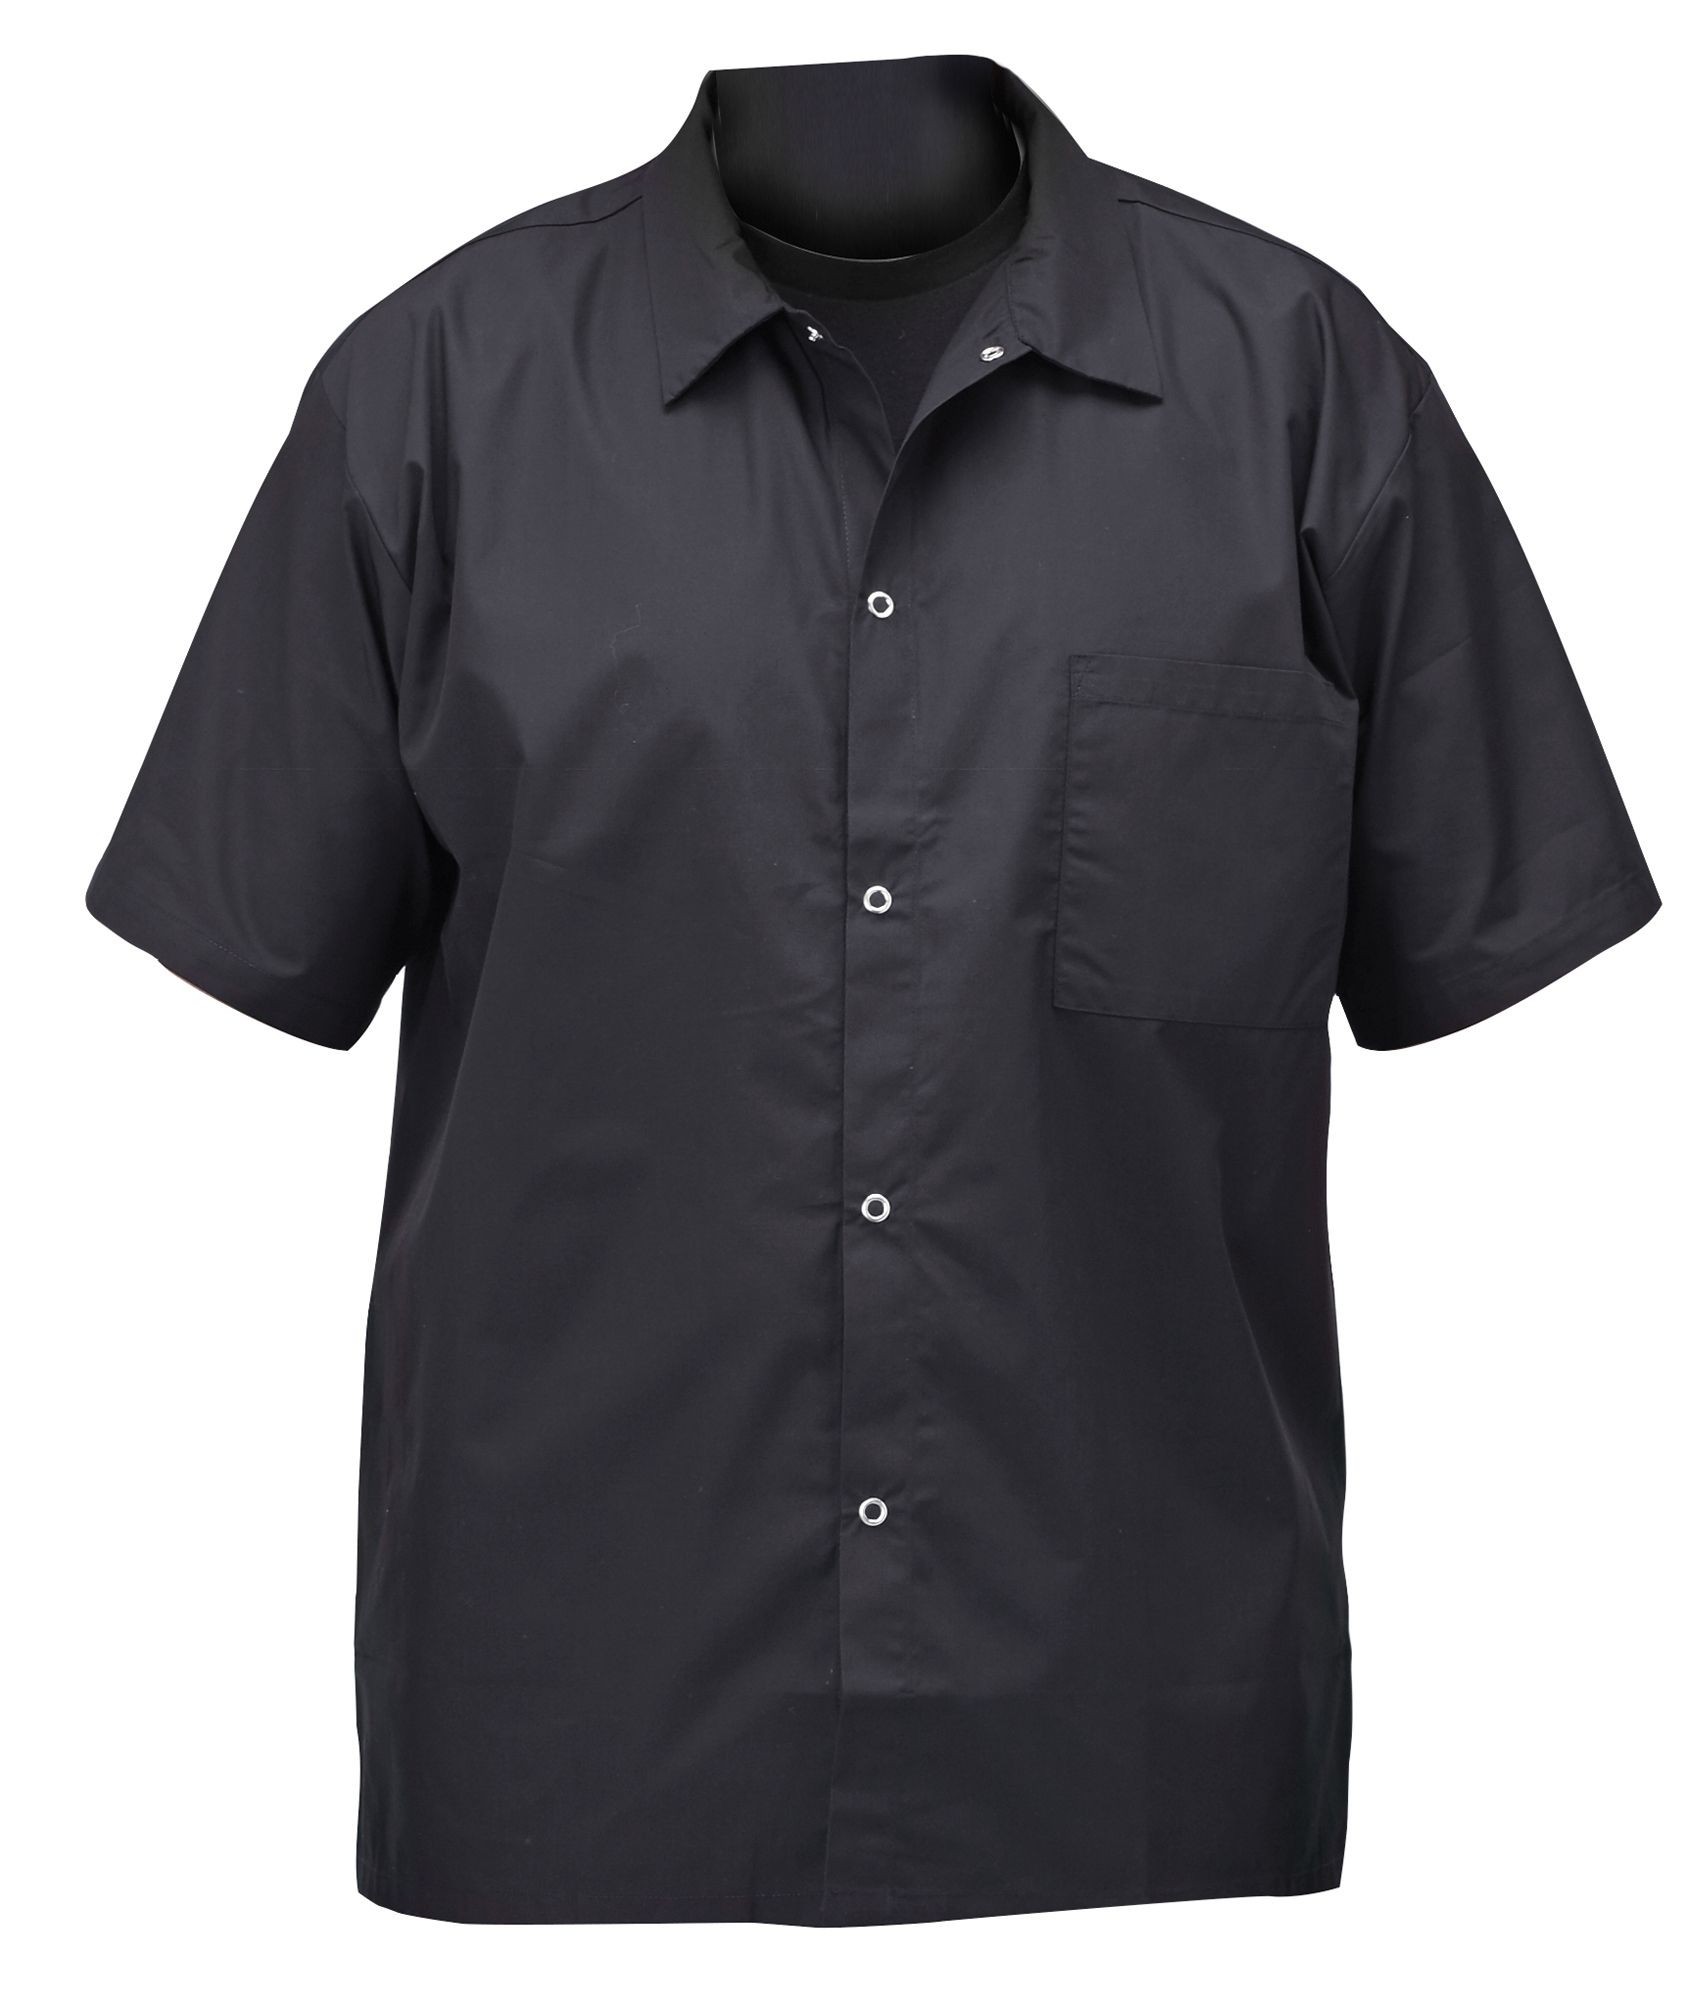 Winco UNF-1KS Black Poly-Cotton Blend Short Sleeved Chef Shirt, Small